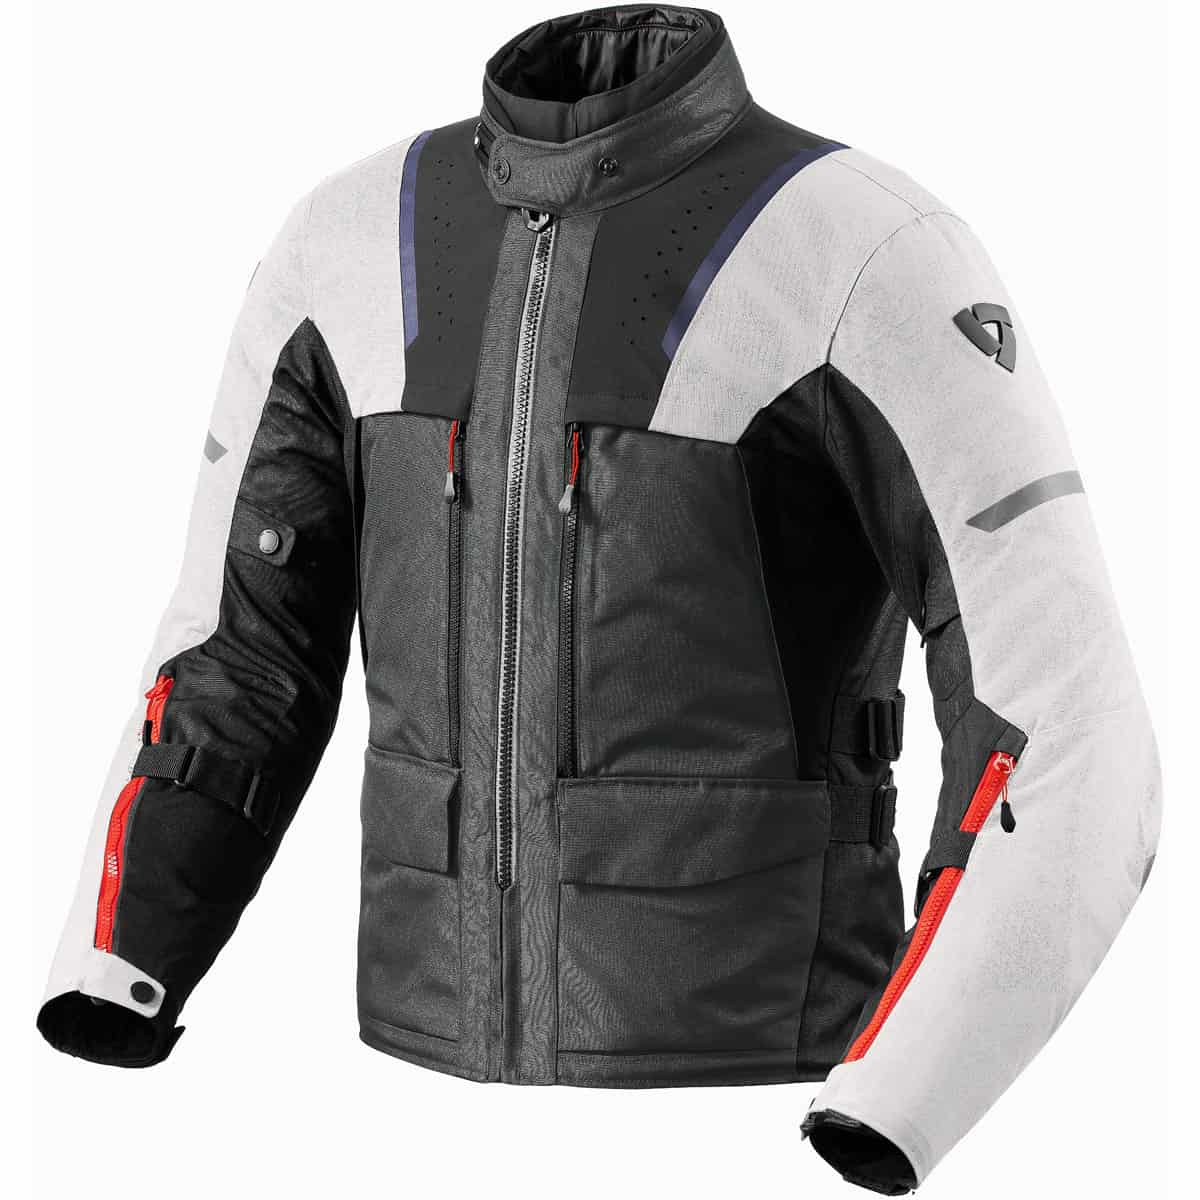 Rev It! Offtrack 2 H2O motorcycle jacket: The ultimate 3-layer adventure riding jacket